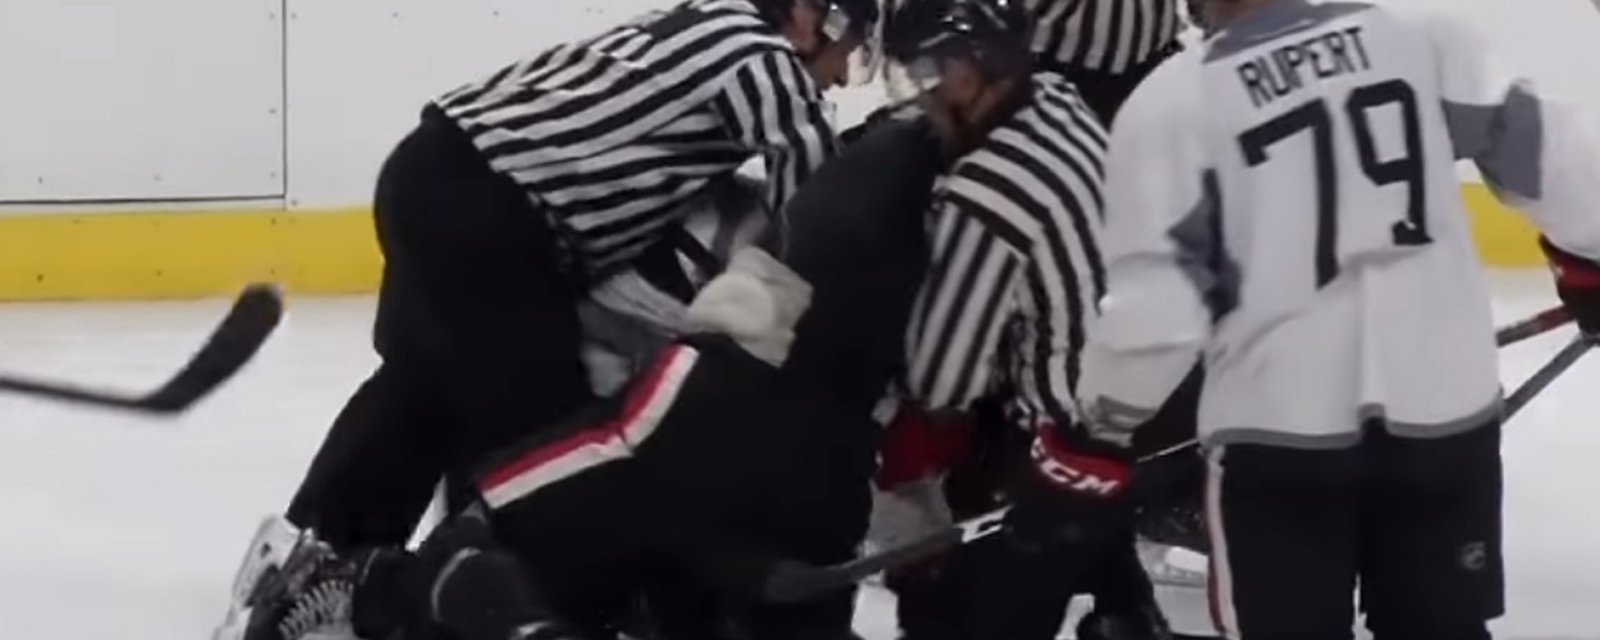 Bobby Ryan attacks his own teammate after ugly hit in training camp!